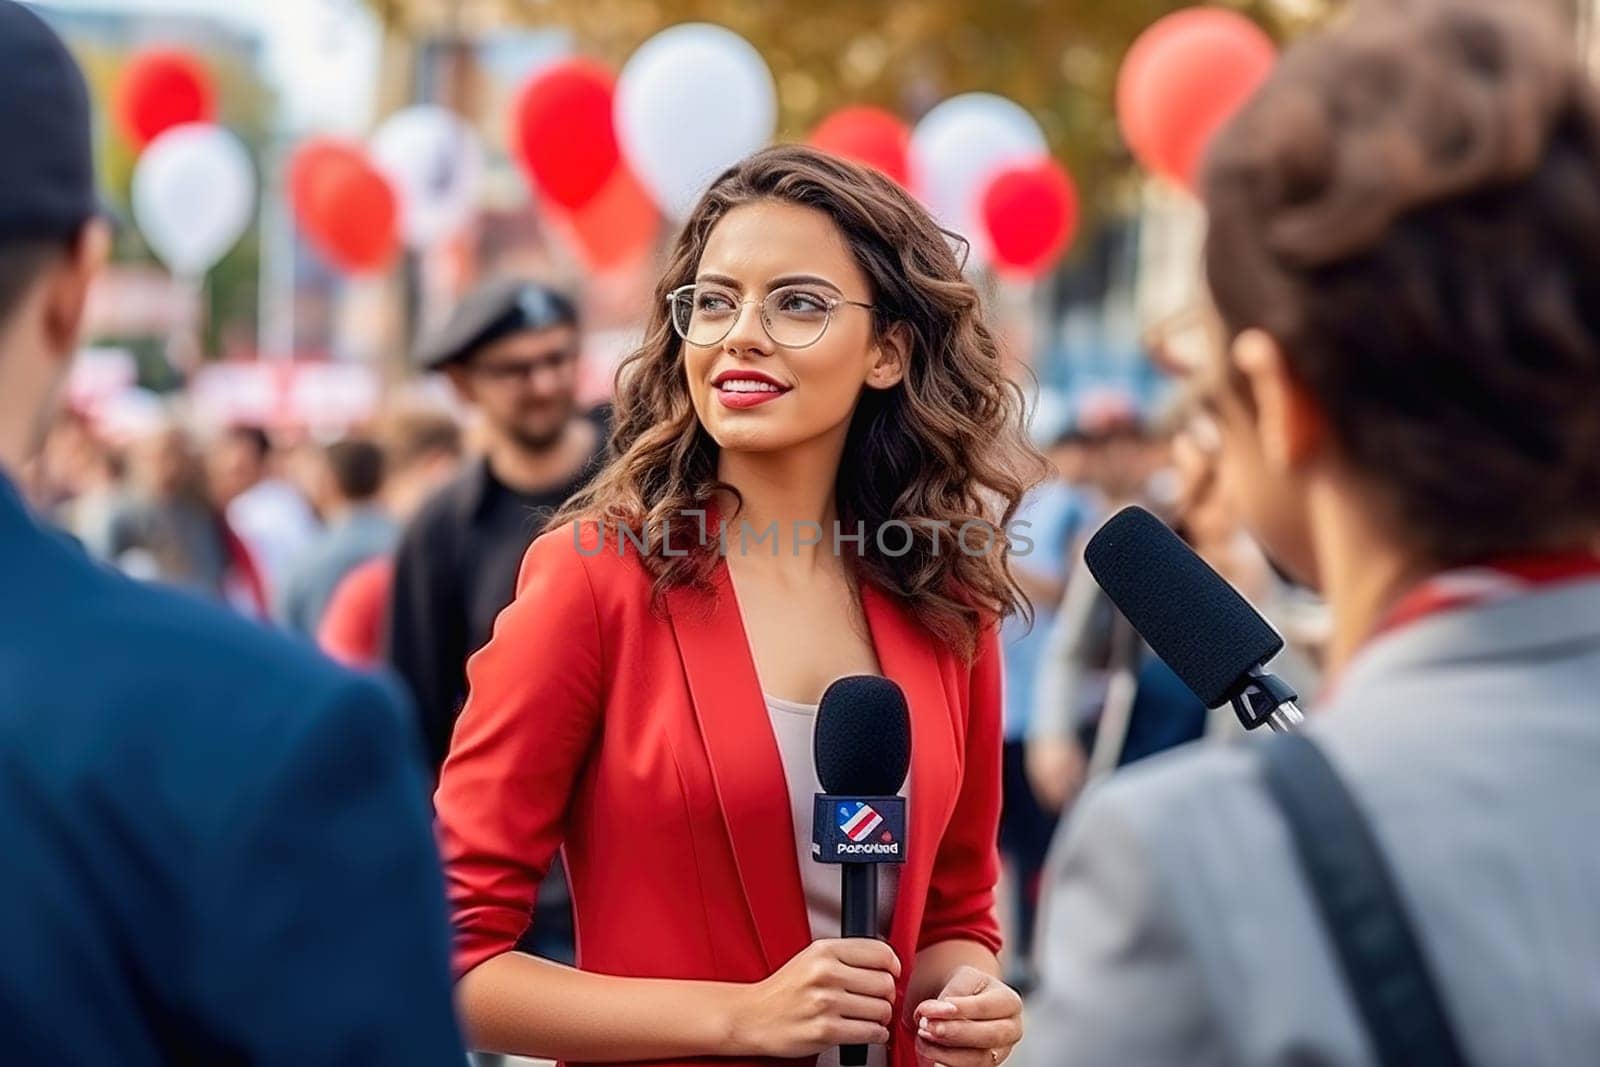 A woman with a microphone interviews people at a rally. by Yurich32